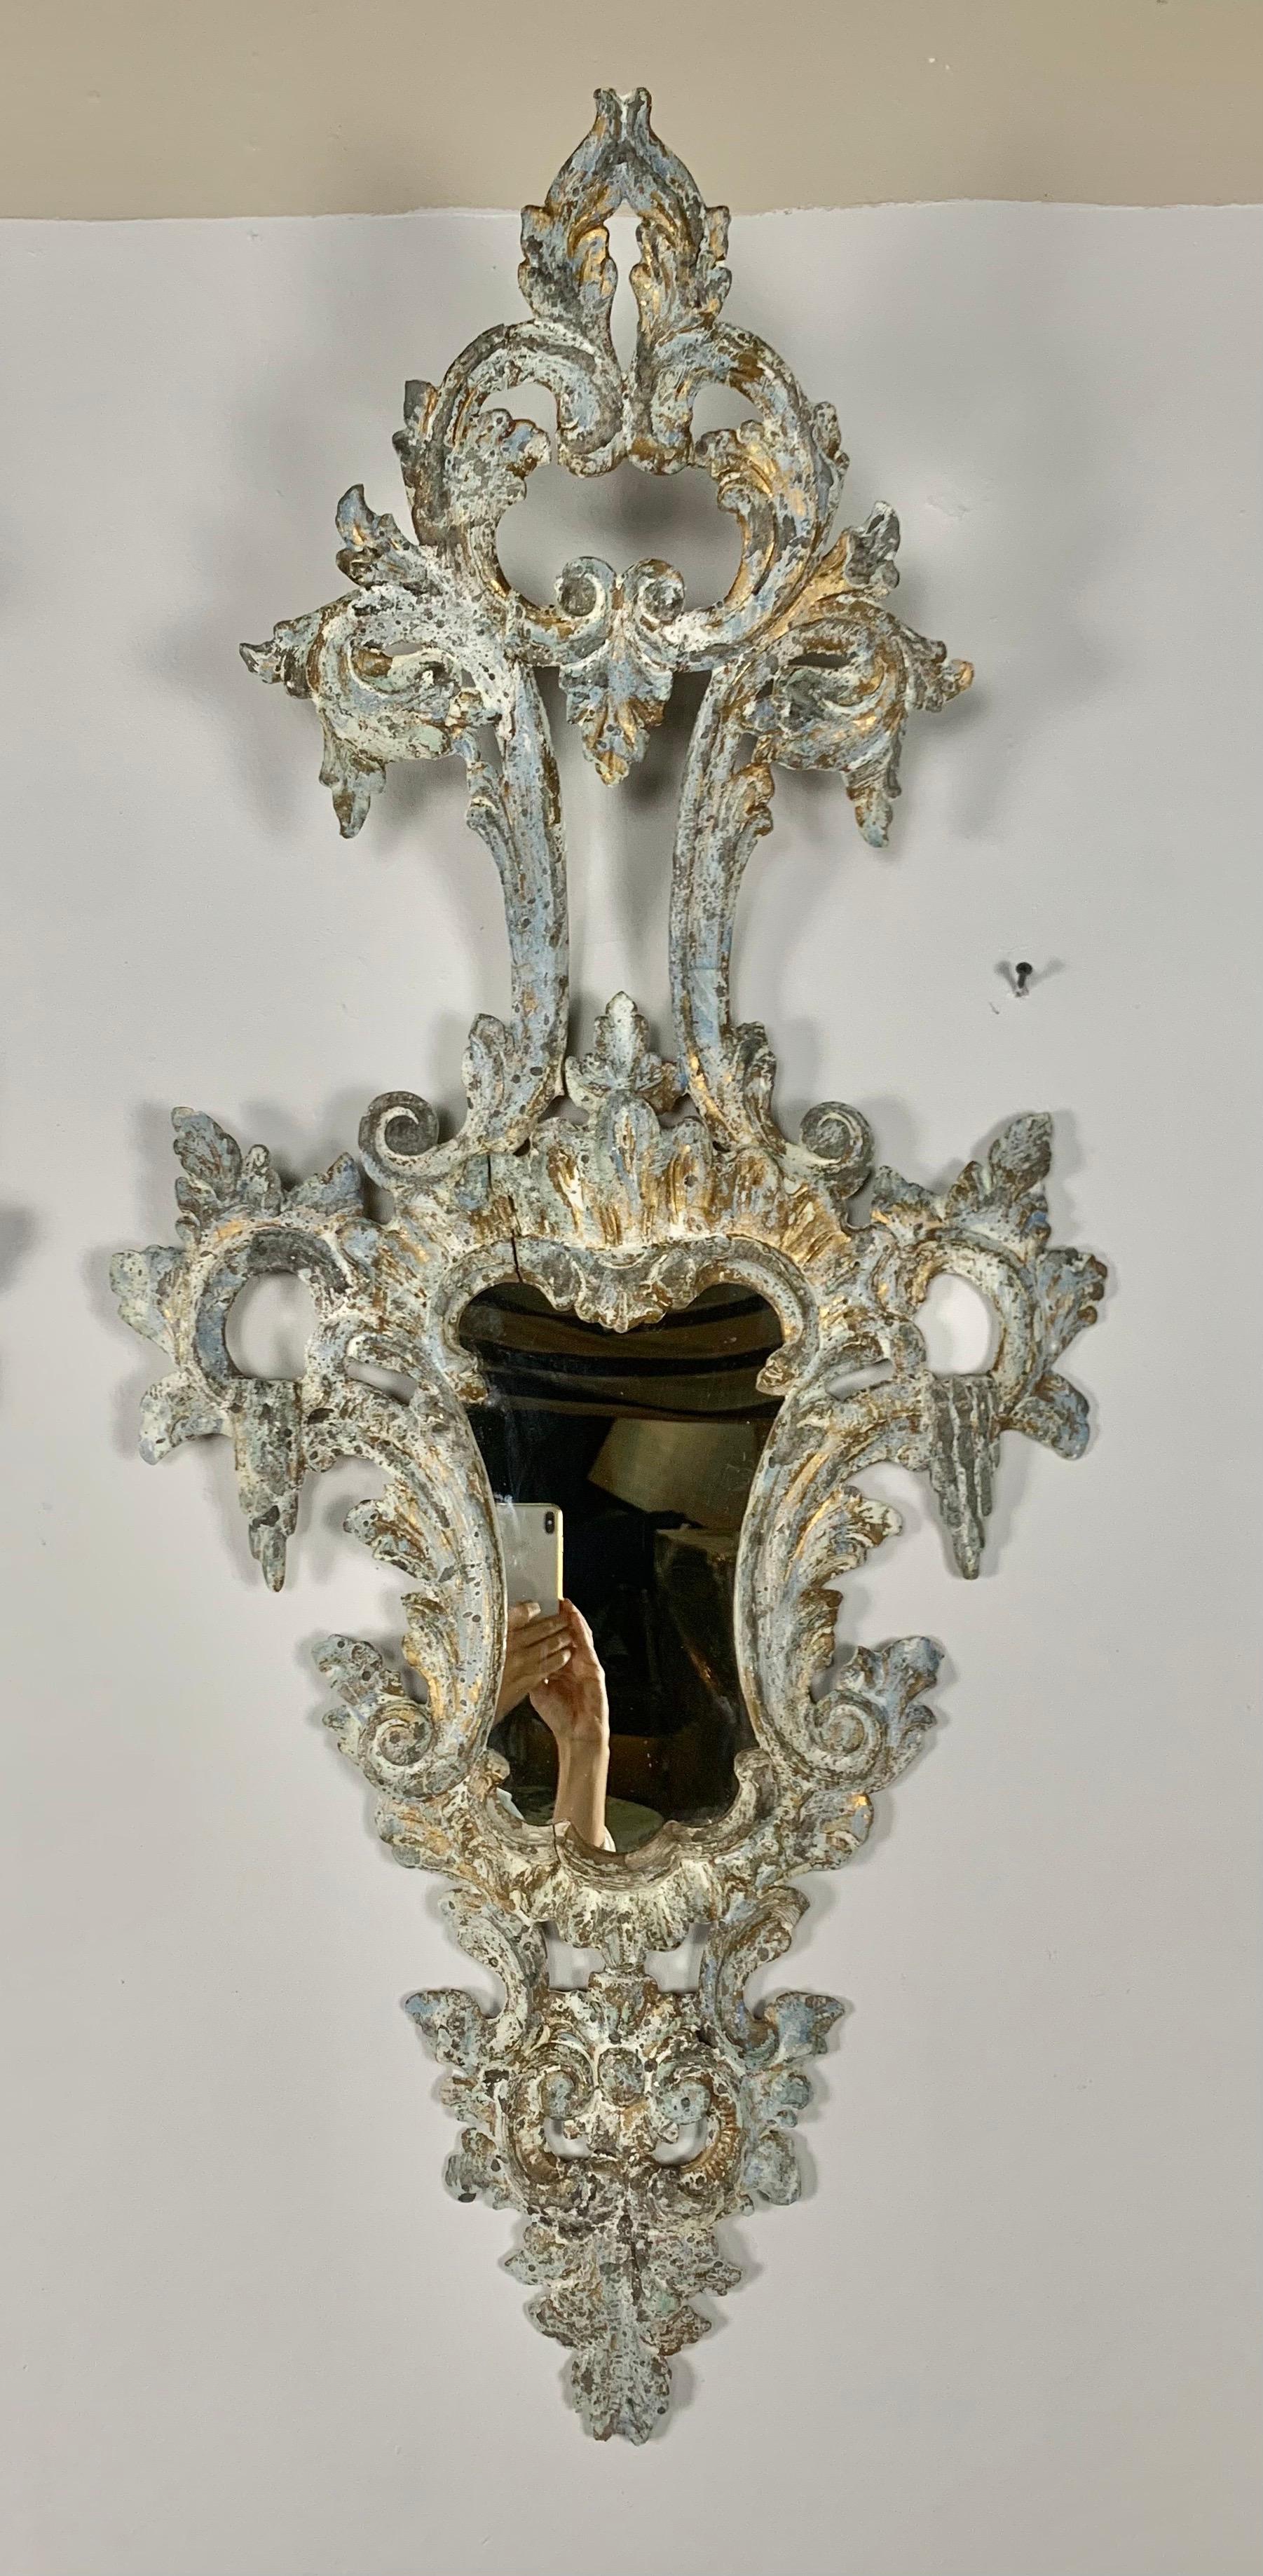 Pair of carved Italian Venetian mirrors. The mirrors are painted with highlights of gold leaf throughout. They are a soft blueish gray with antique white and gold throughout.